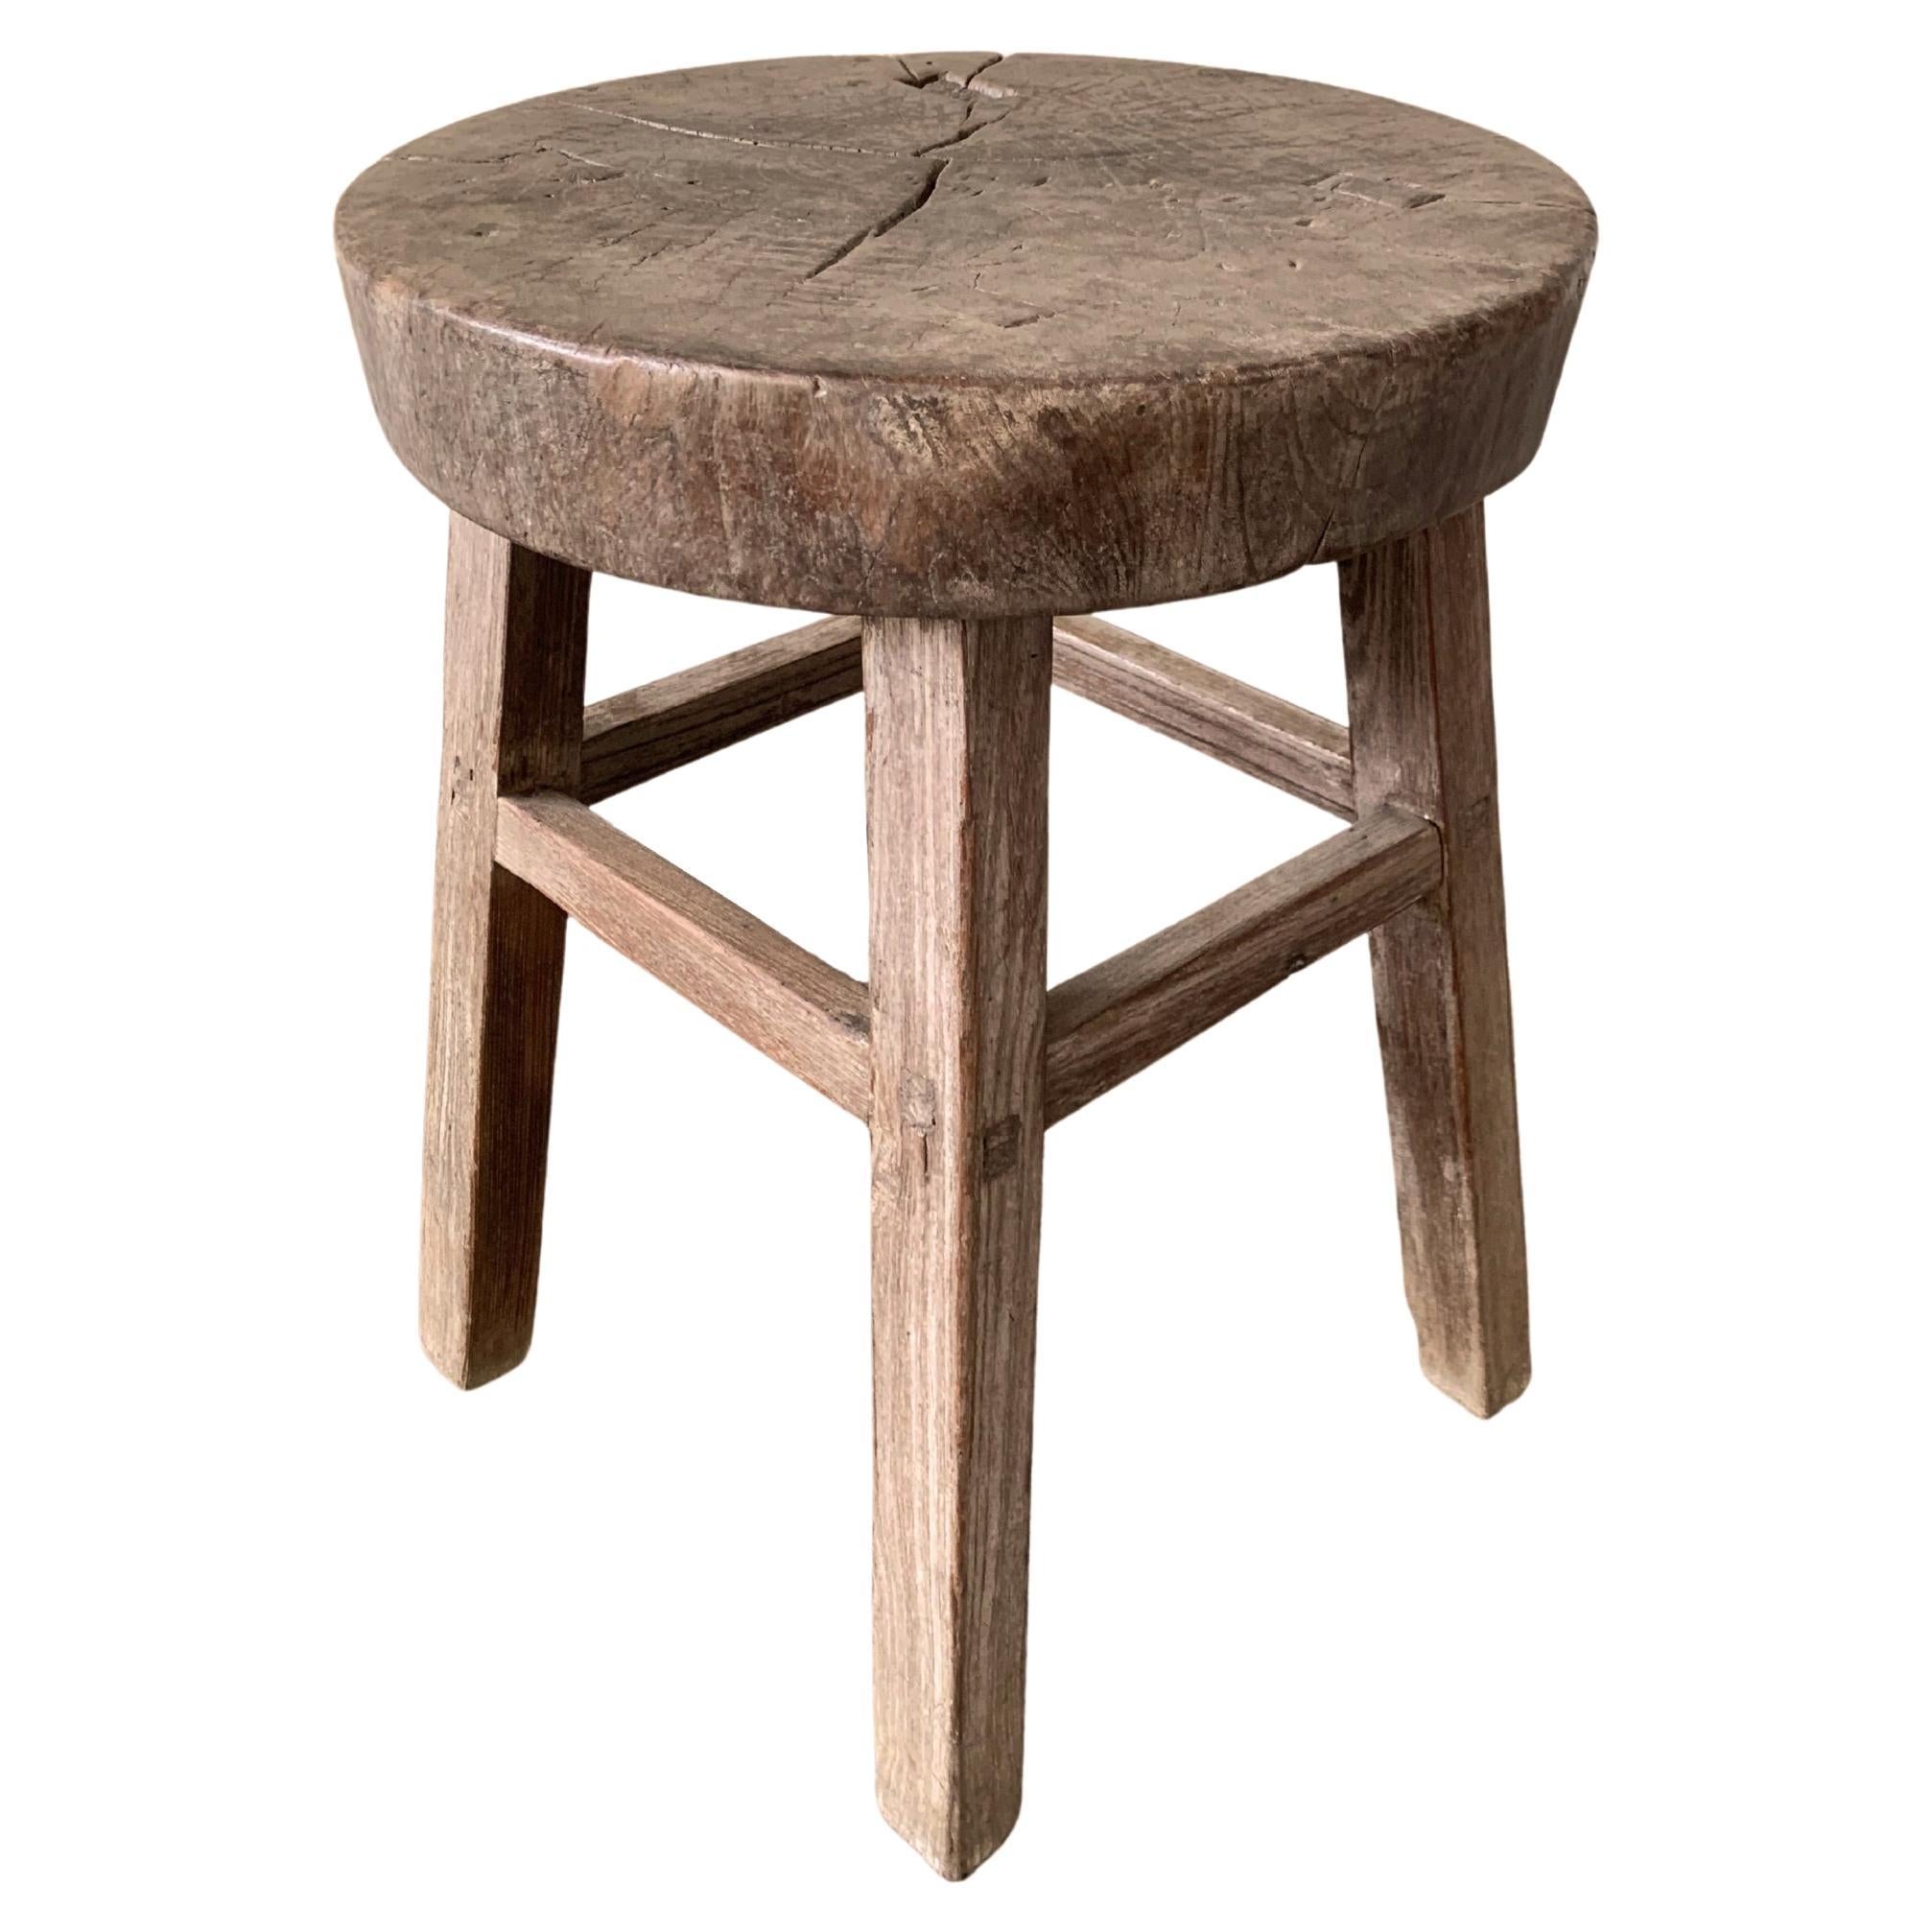 Antique Chinese Elm Wood Stool, Early 20th Century